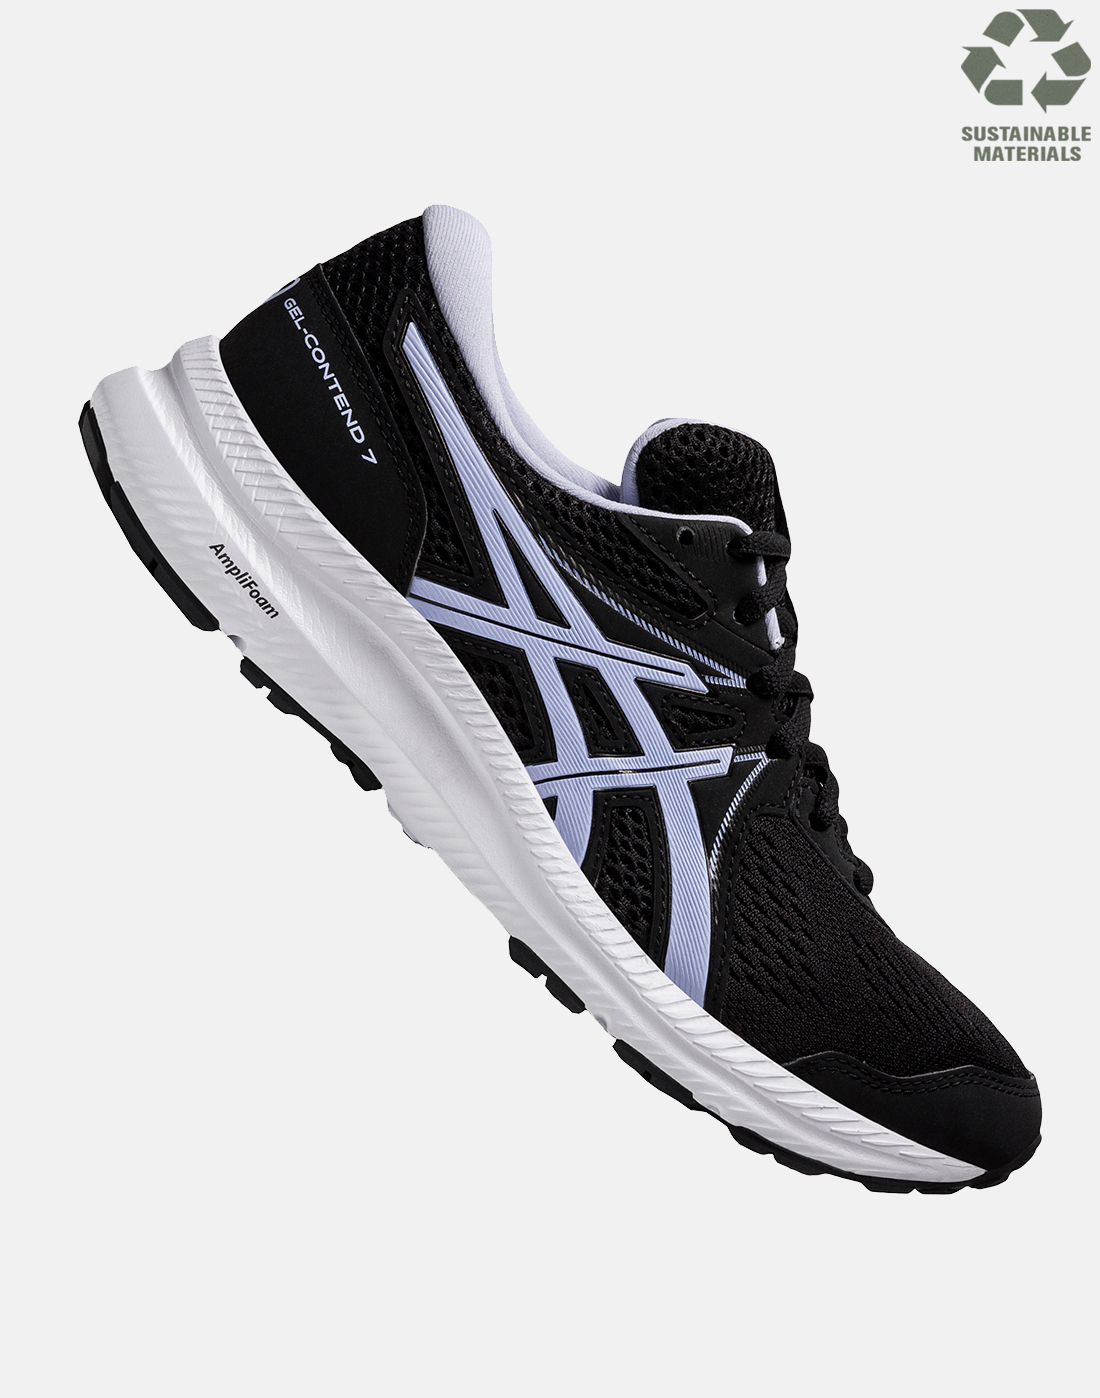 Asics Womens Gel Contend 7 - Black | Life Style Sports IE